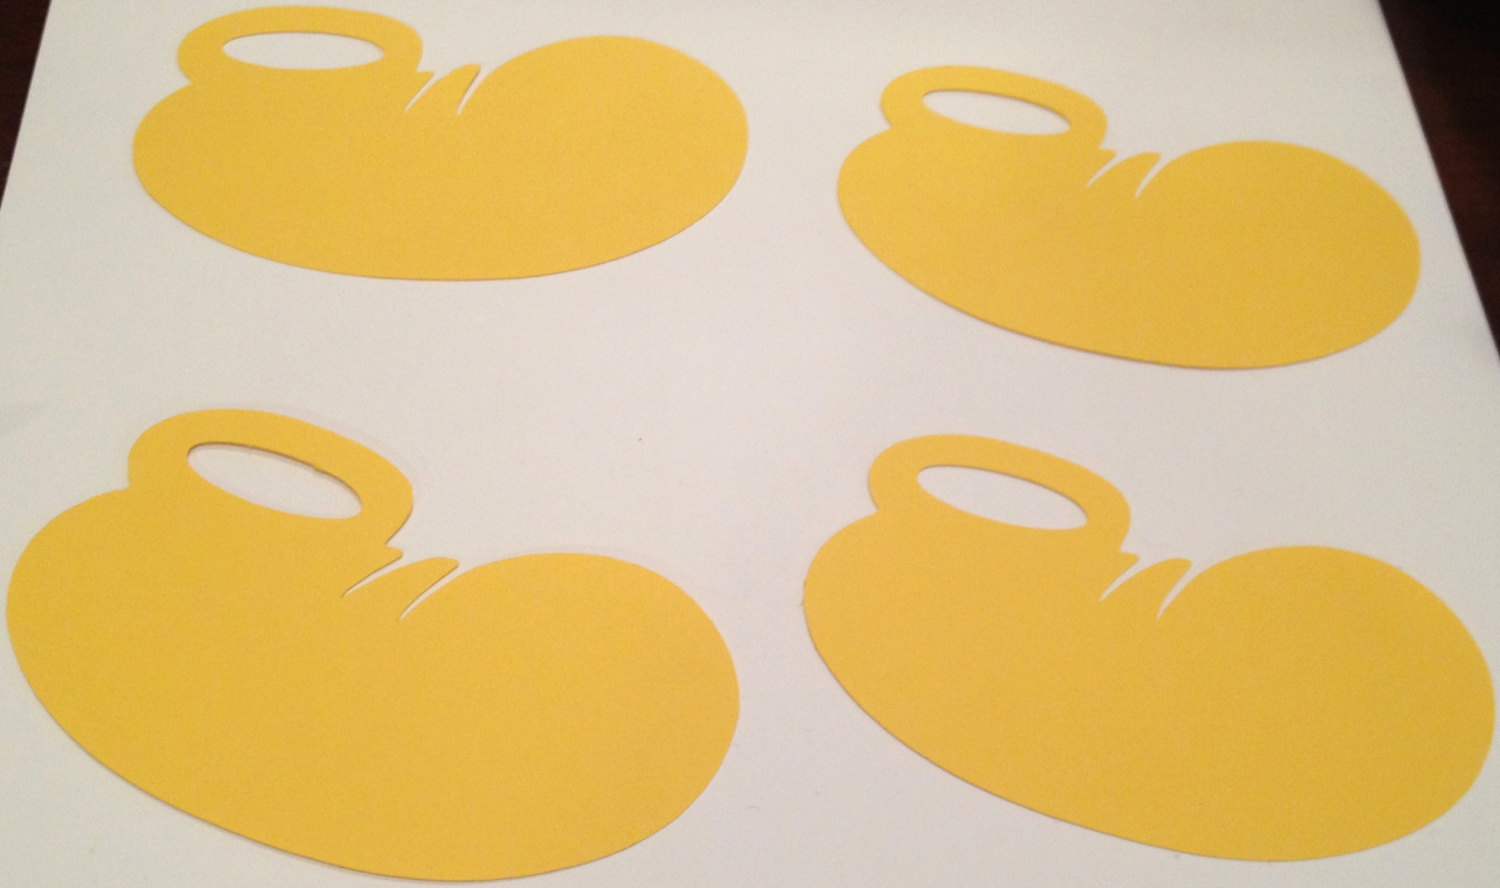 30 Mickey Mouse Yellow Shoes Silhouette Card By Lulubellacreations